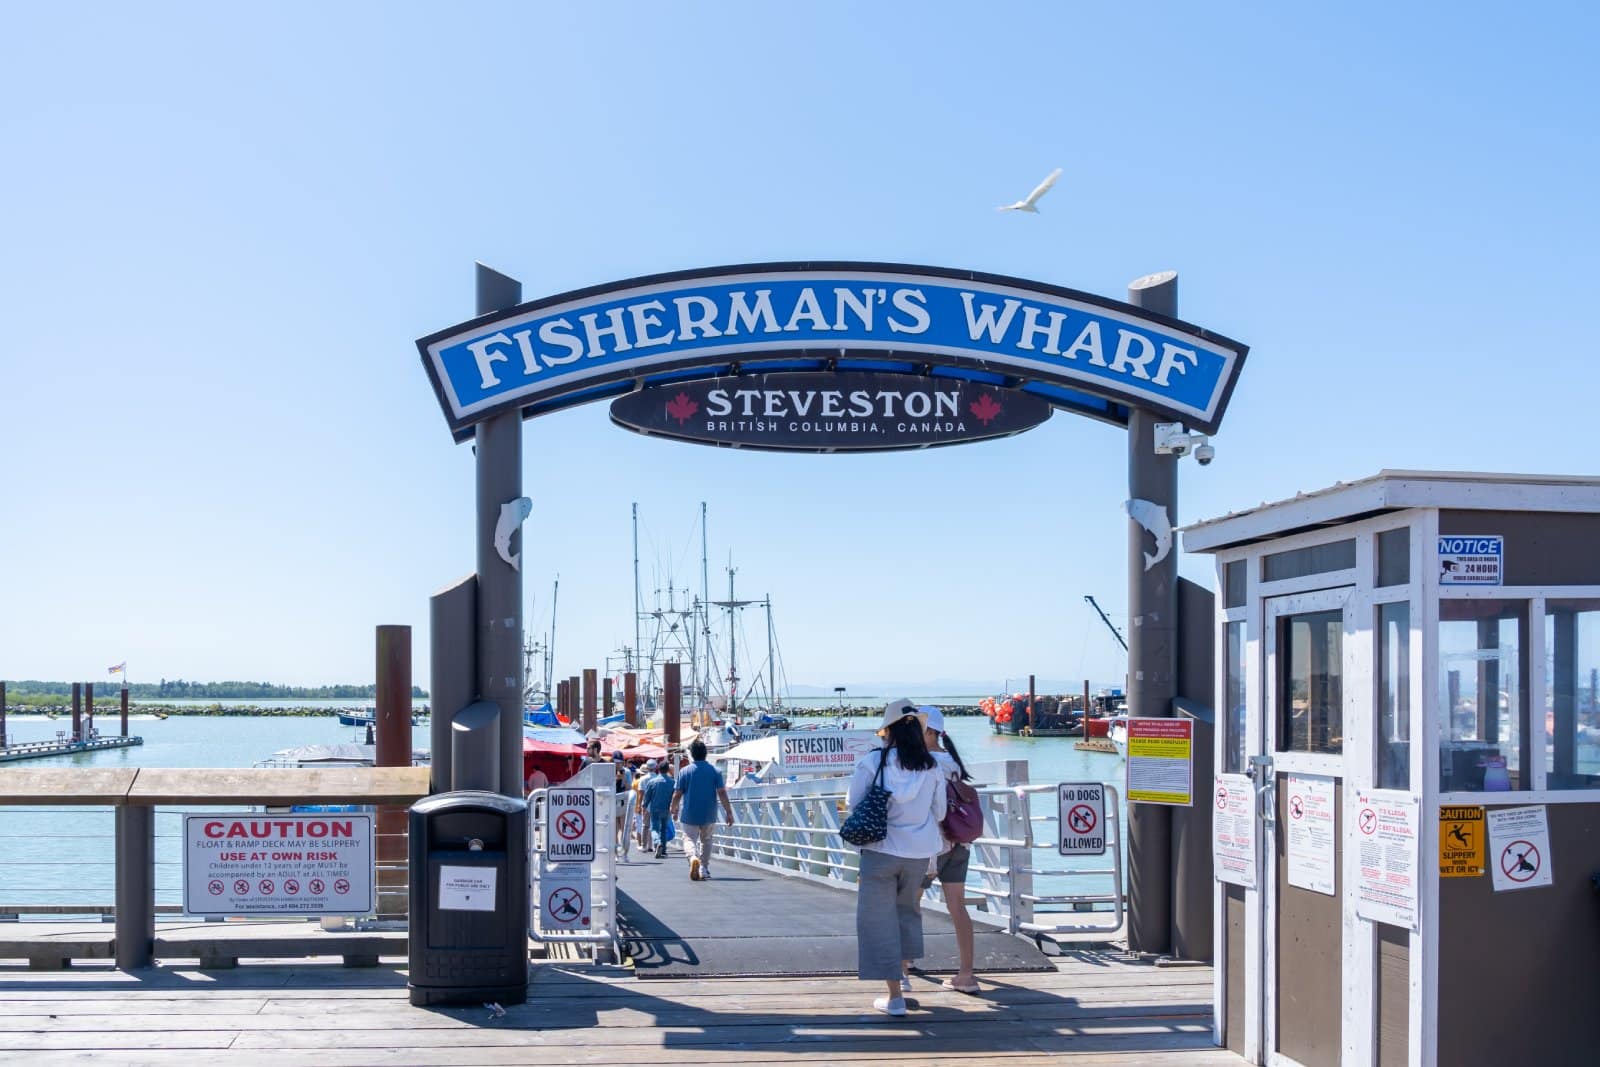 Image Credit: Shutterstock / JHVEPhoto <p><span>Explore sea lions, sourdough, and submarines at this bustling waterfront. The seafood is fresh, but tourist traps with high prices abound. Know where to eat before you go.</span></p>